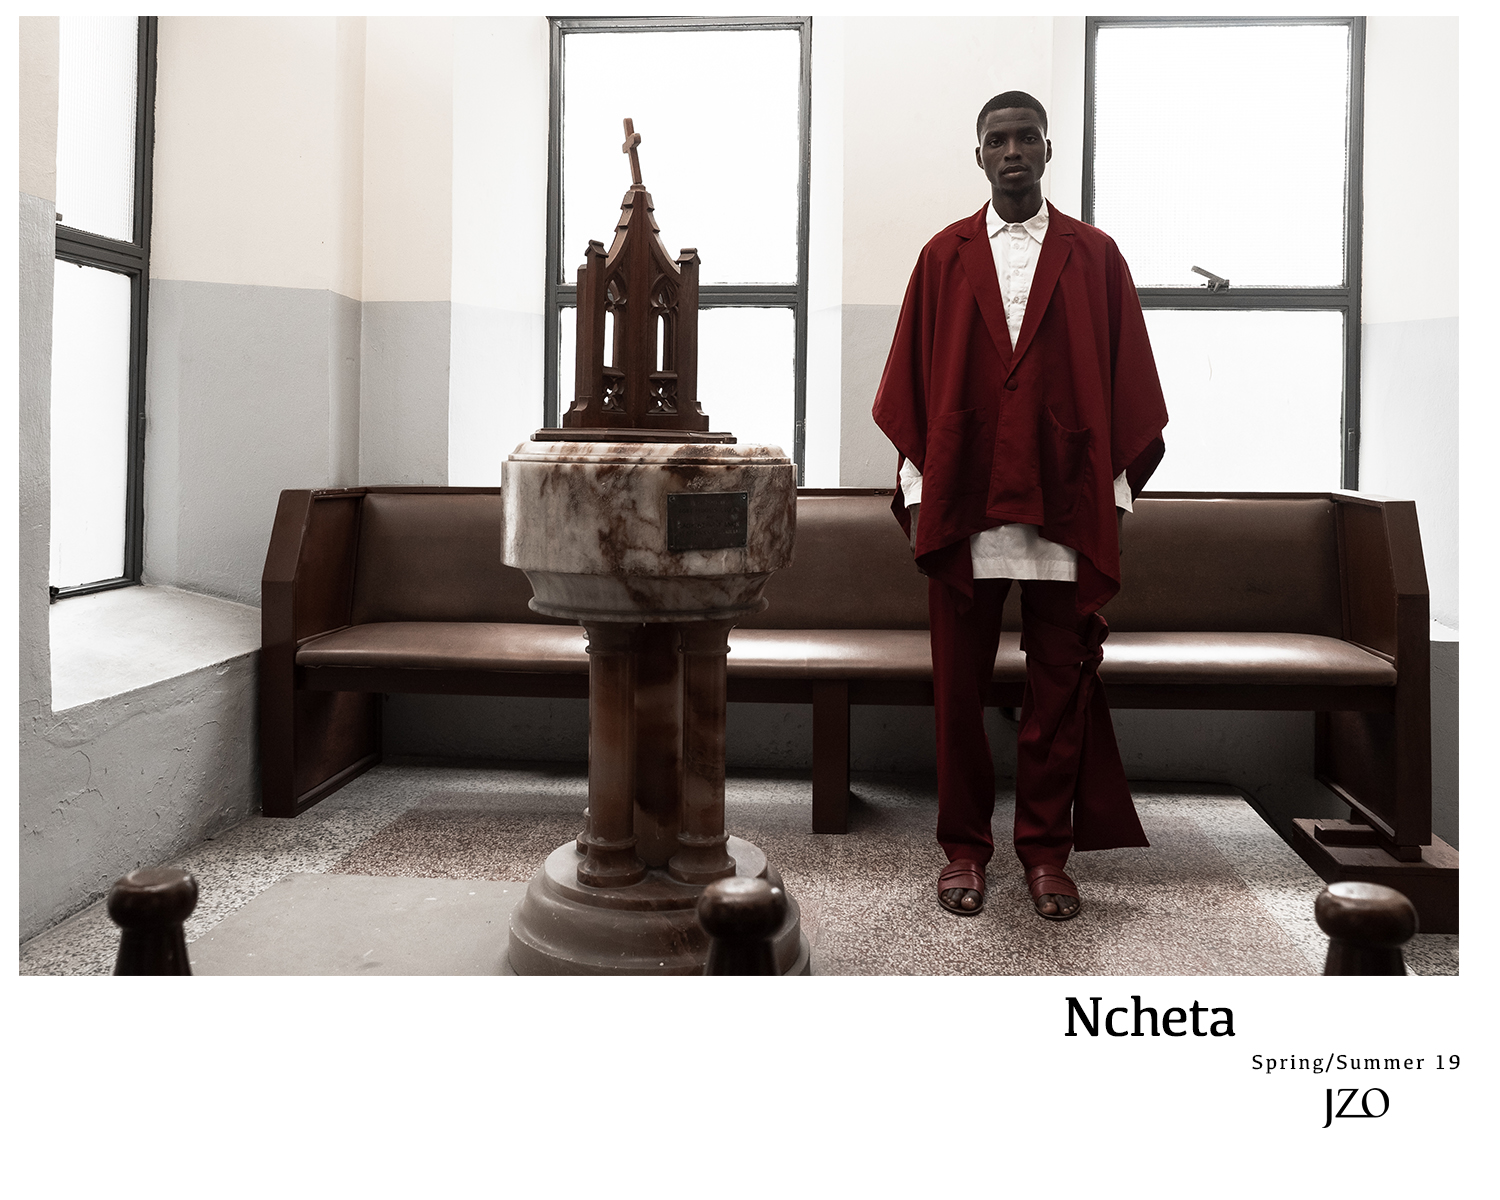 MUST SEE: JZO Presents “Ncheta” For Spring/Summer 2019